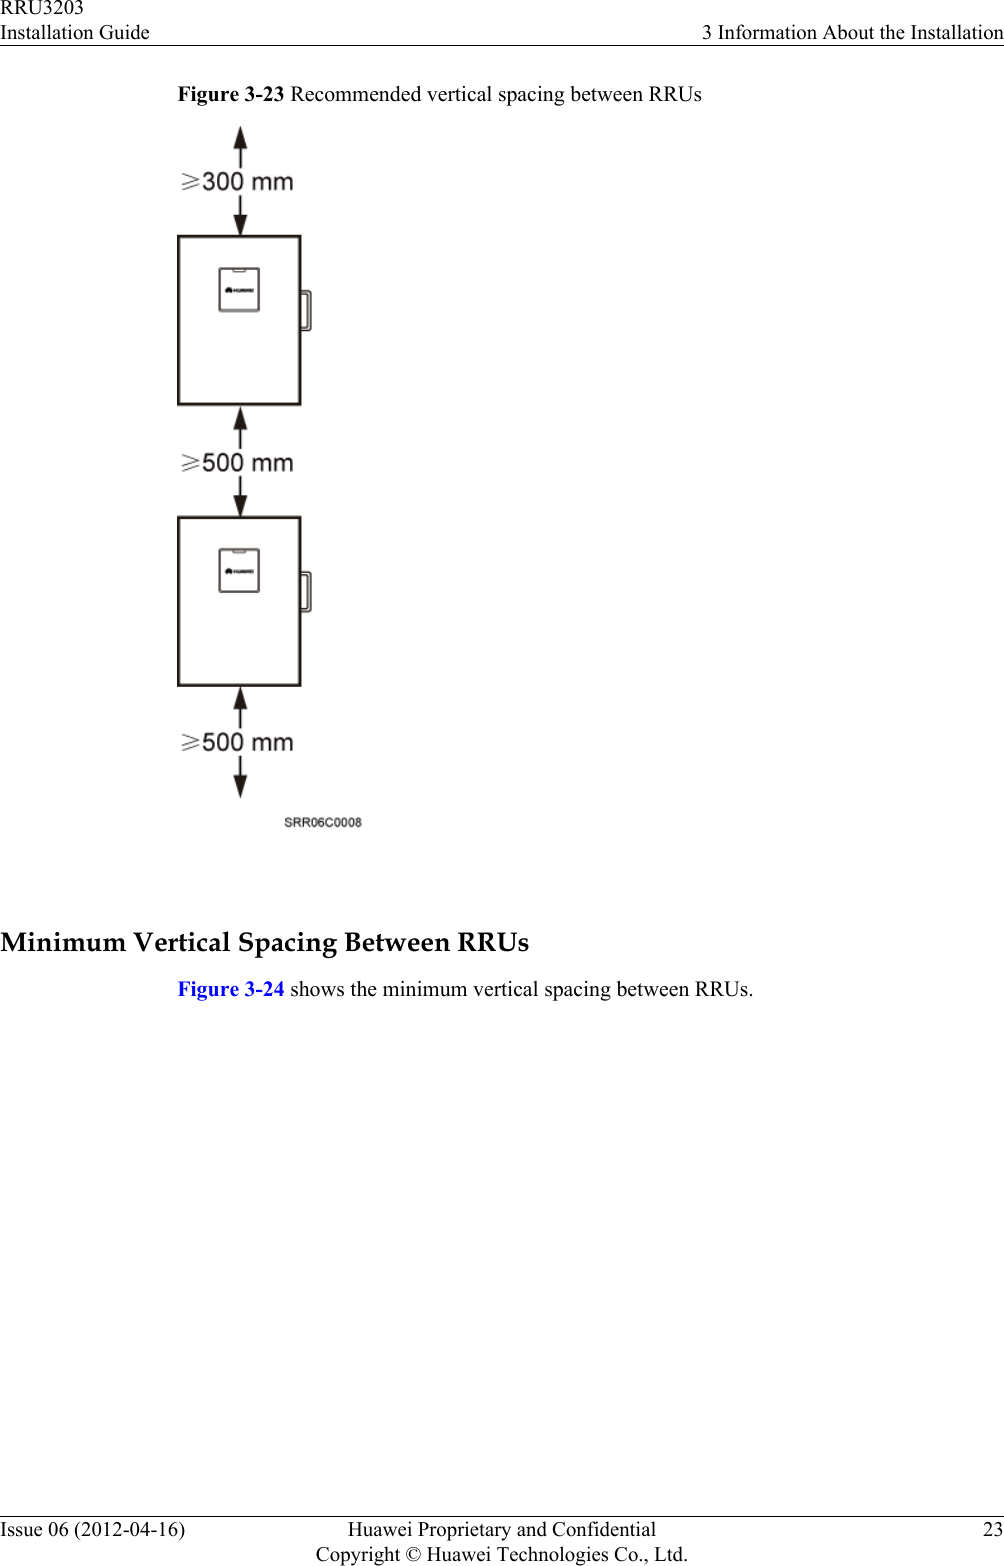 Figure 3-23 Recommended vertical spacing between RRUs Minimum Vertical Spacing Between RRUsFigure 3-24 shows the minimum vertical spacing between RRUs.RRU3203Installation Guide 3 Information About the InstallationIssue 06 (2012-04-16) Huawei Proprietary and ConfidentialCopyright © Huawei Technologies Co., Ltd.23